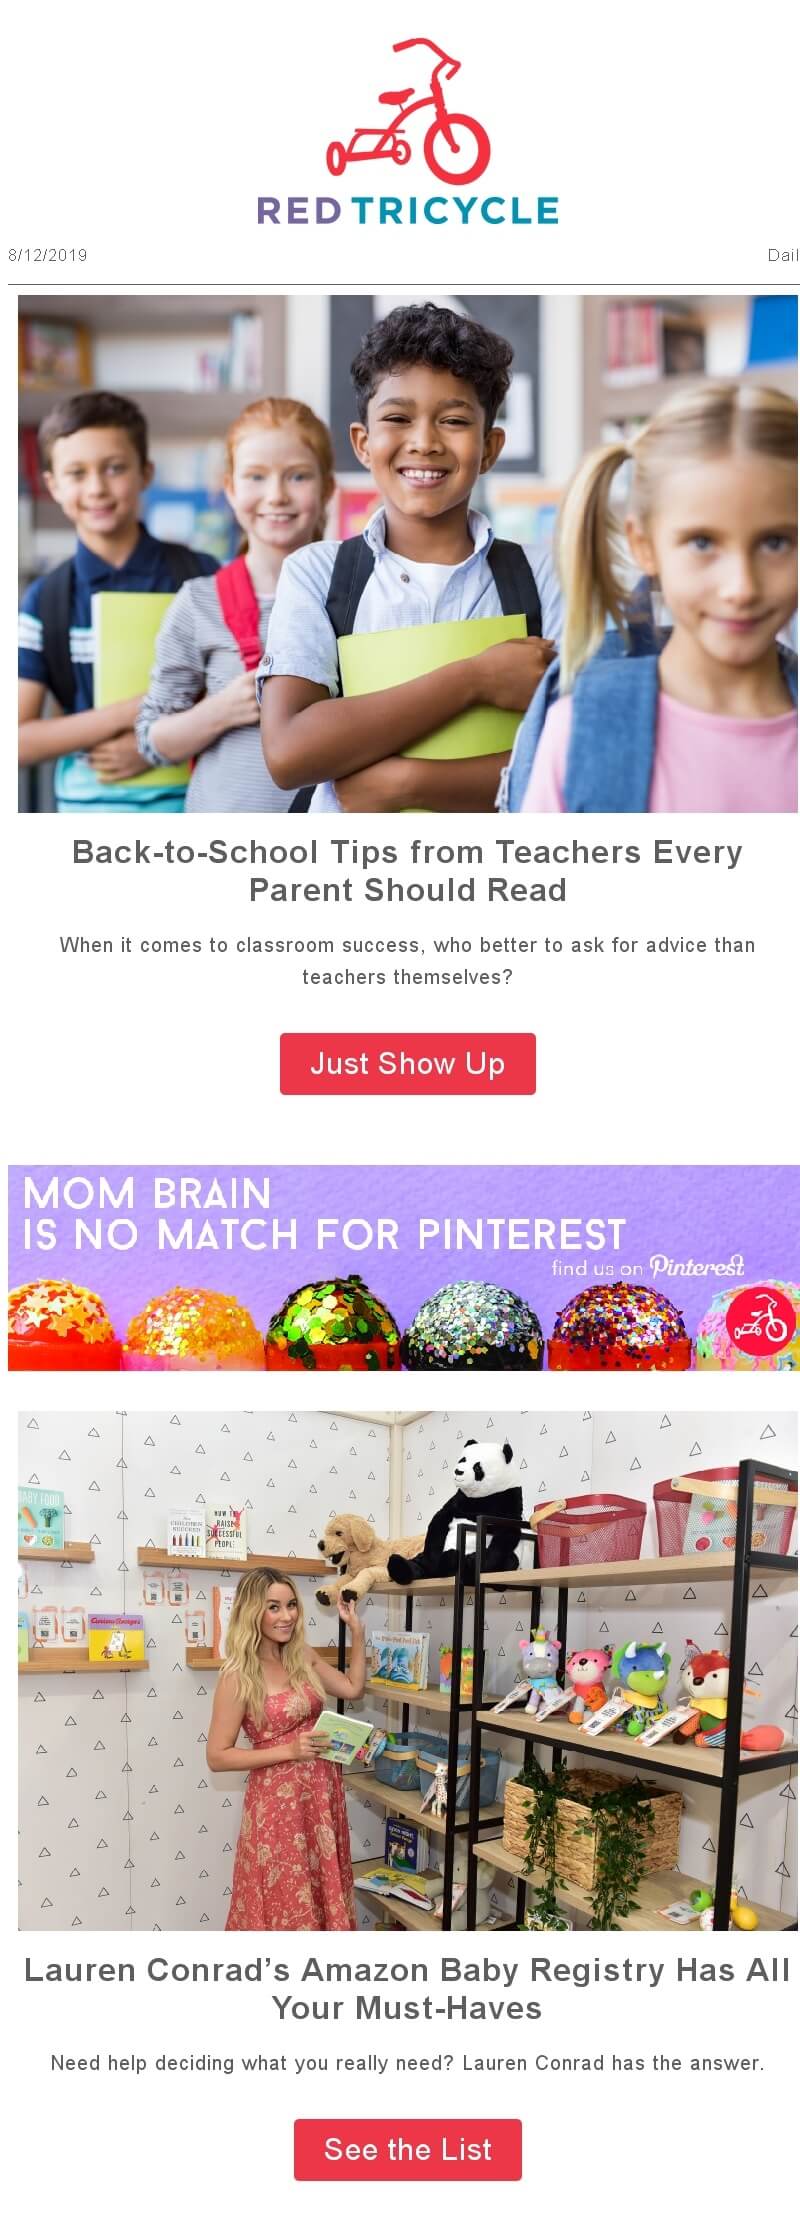 Back-to-school email from Red Tricycle